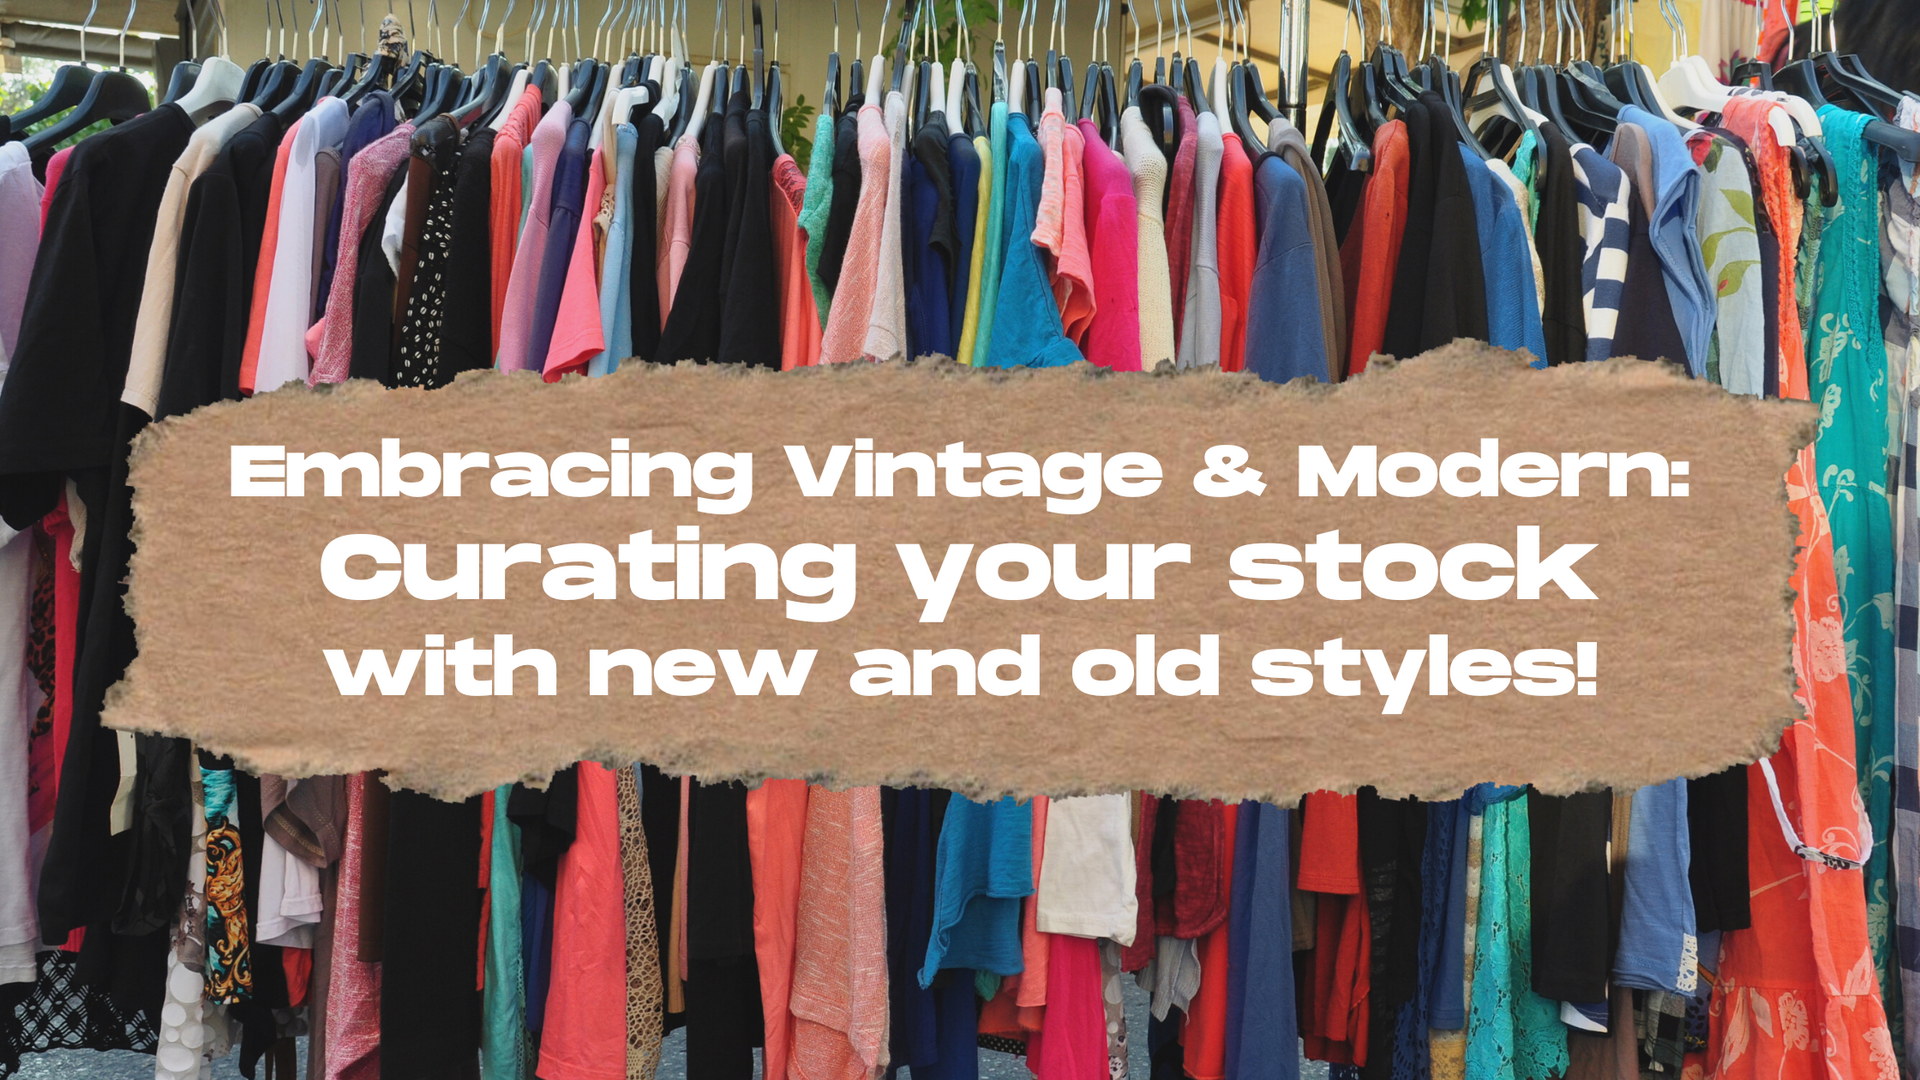 Embracing Vintage & Modern: Curating your stock with new and old styles!